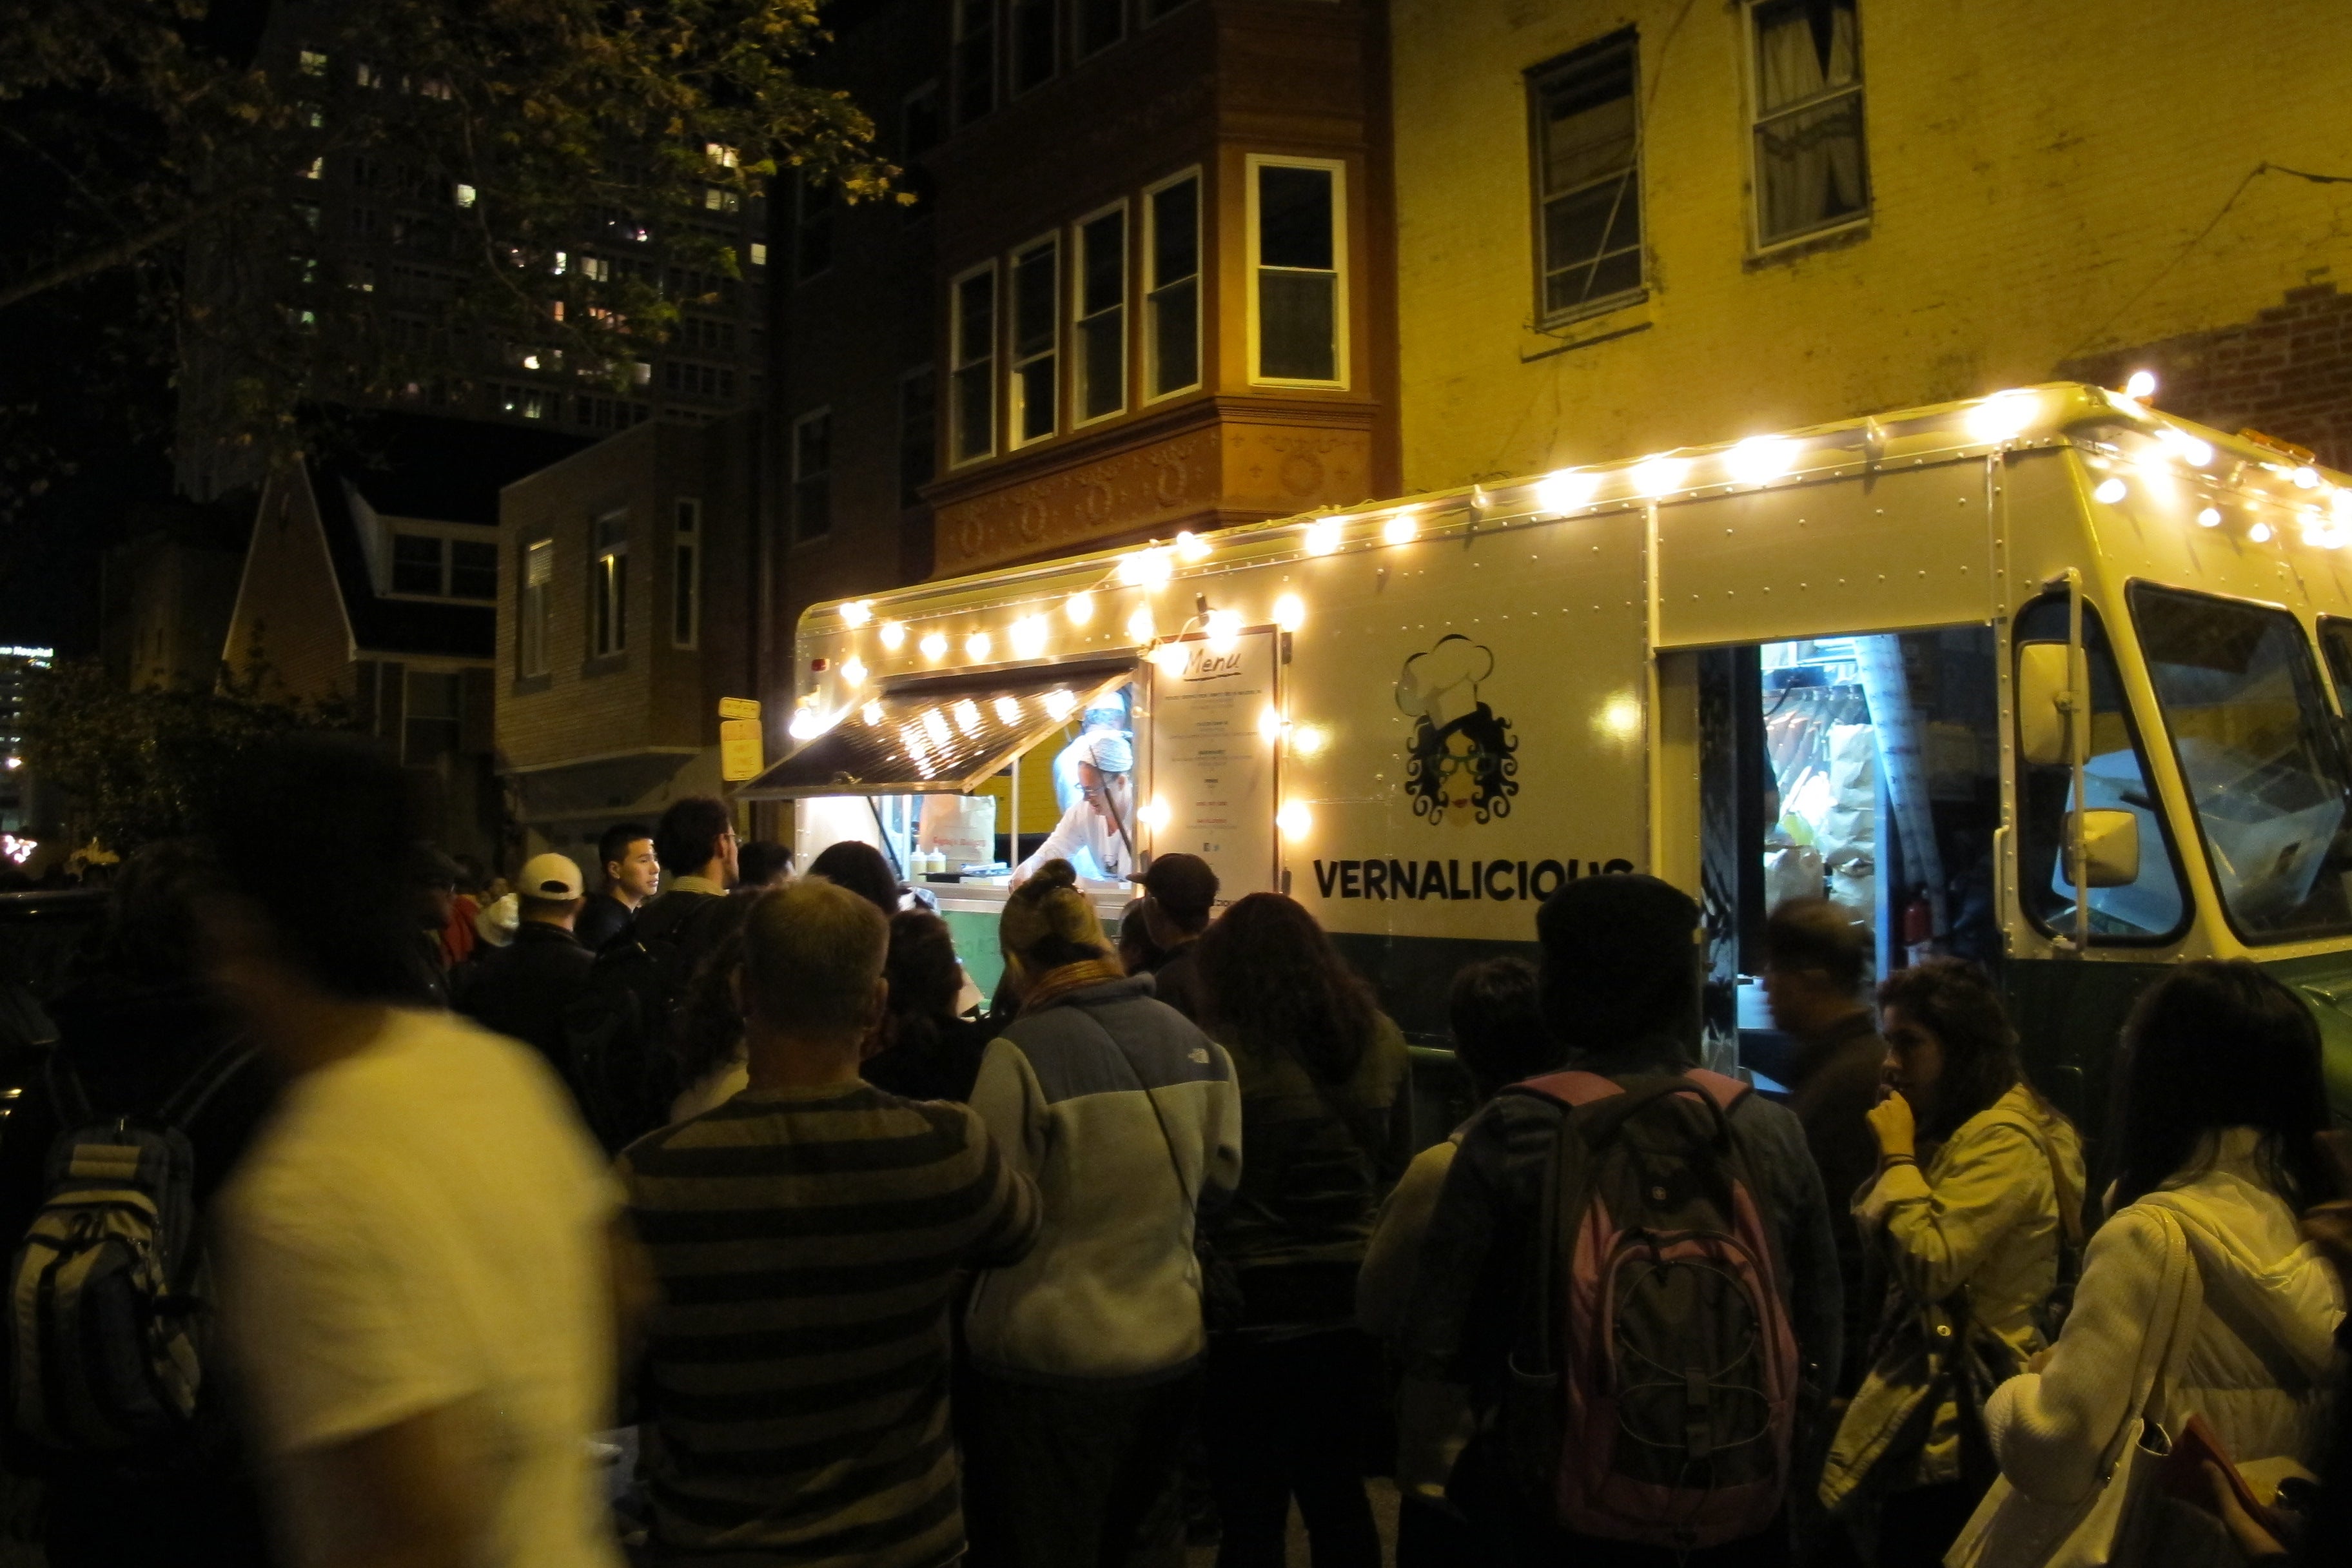 Night Market is back for the season, starting out in Northern Liberties Thursday night.